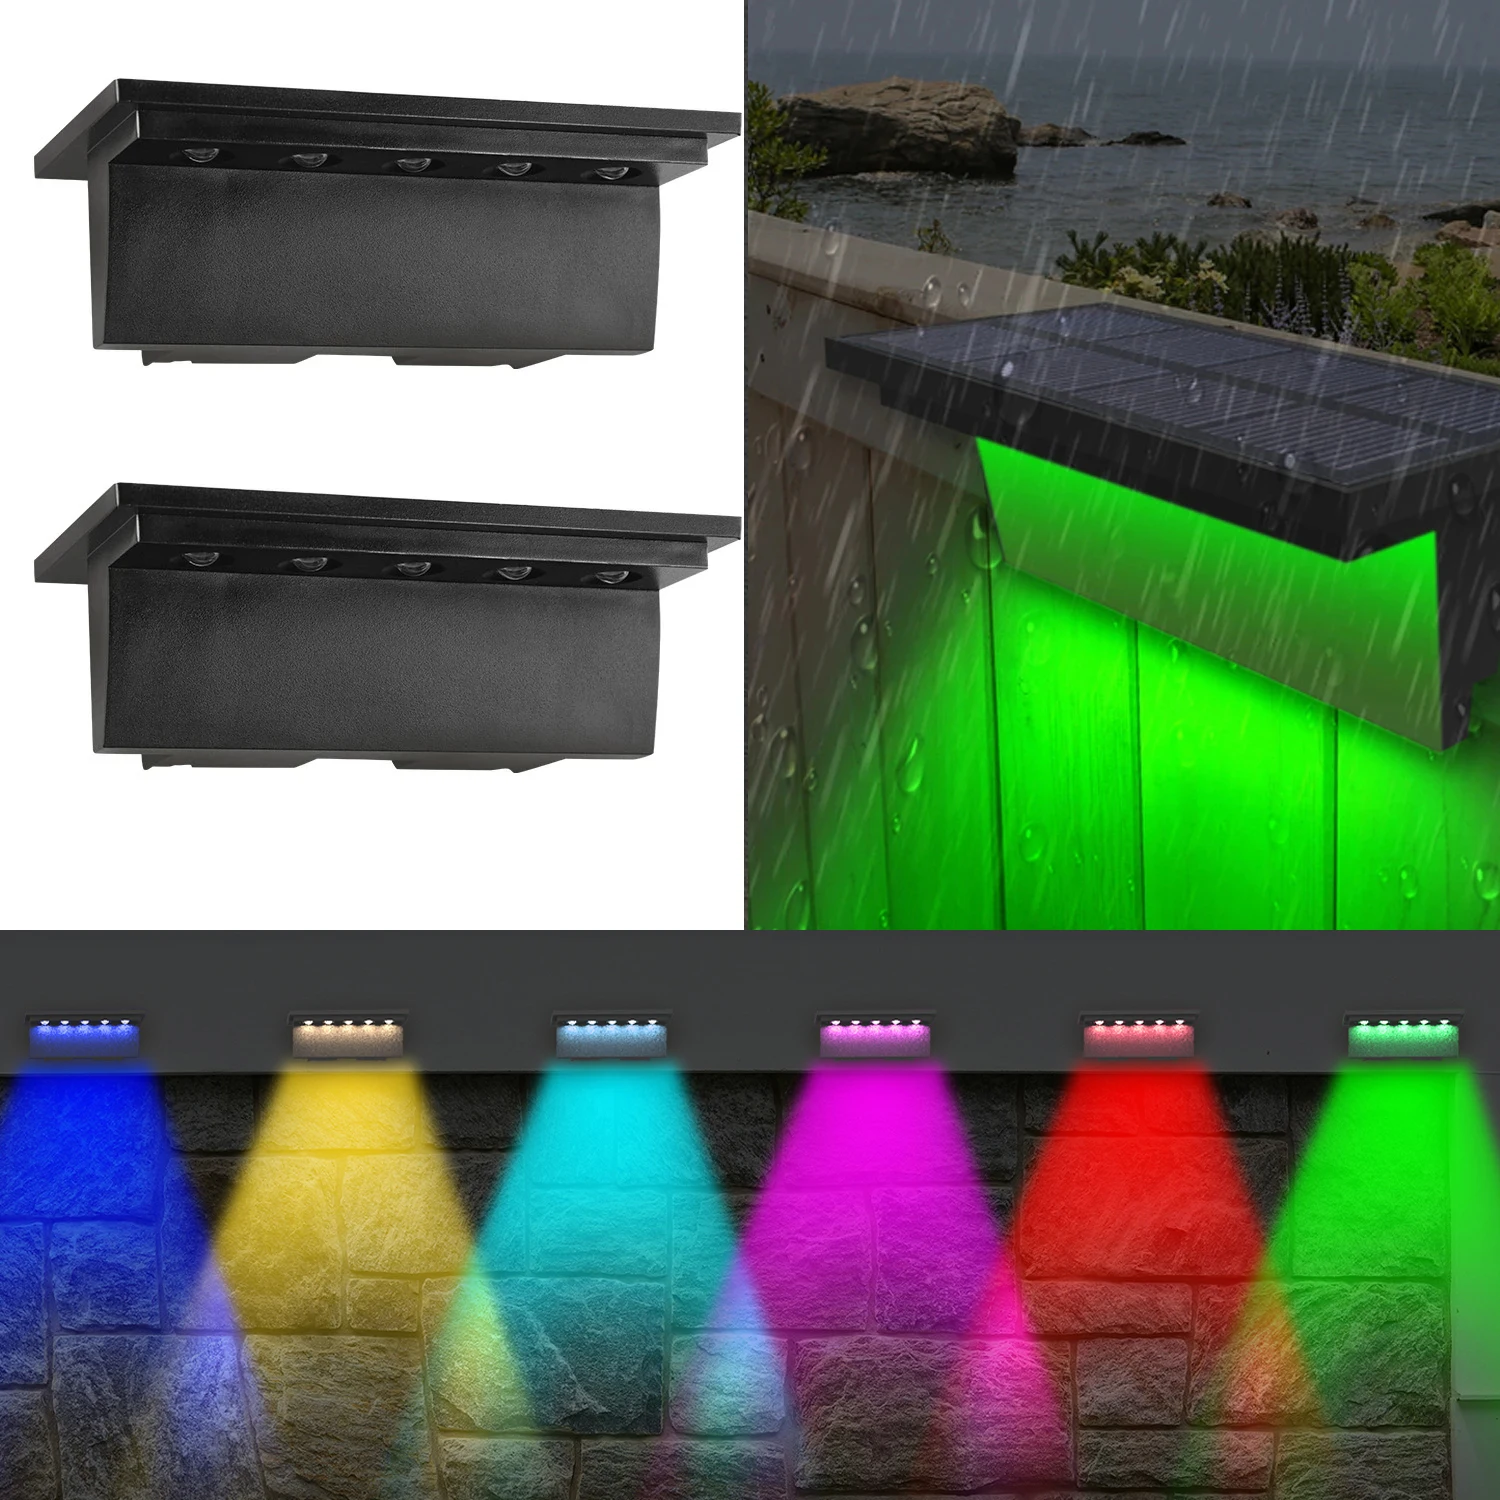 Solar Deck Lights Outdoor Stairs Fence Yard Patio Step Lamp Waterproof Led RGB Garden Terrace Guardrail Pathway Solar Light children s bed girls get on and off the bed double deck mother child bed slides with the same width boys guardrail